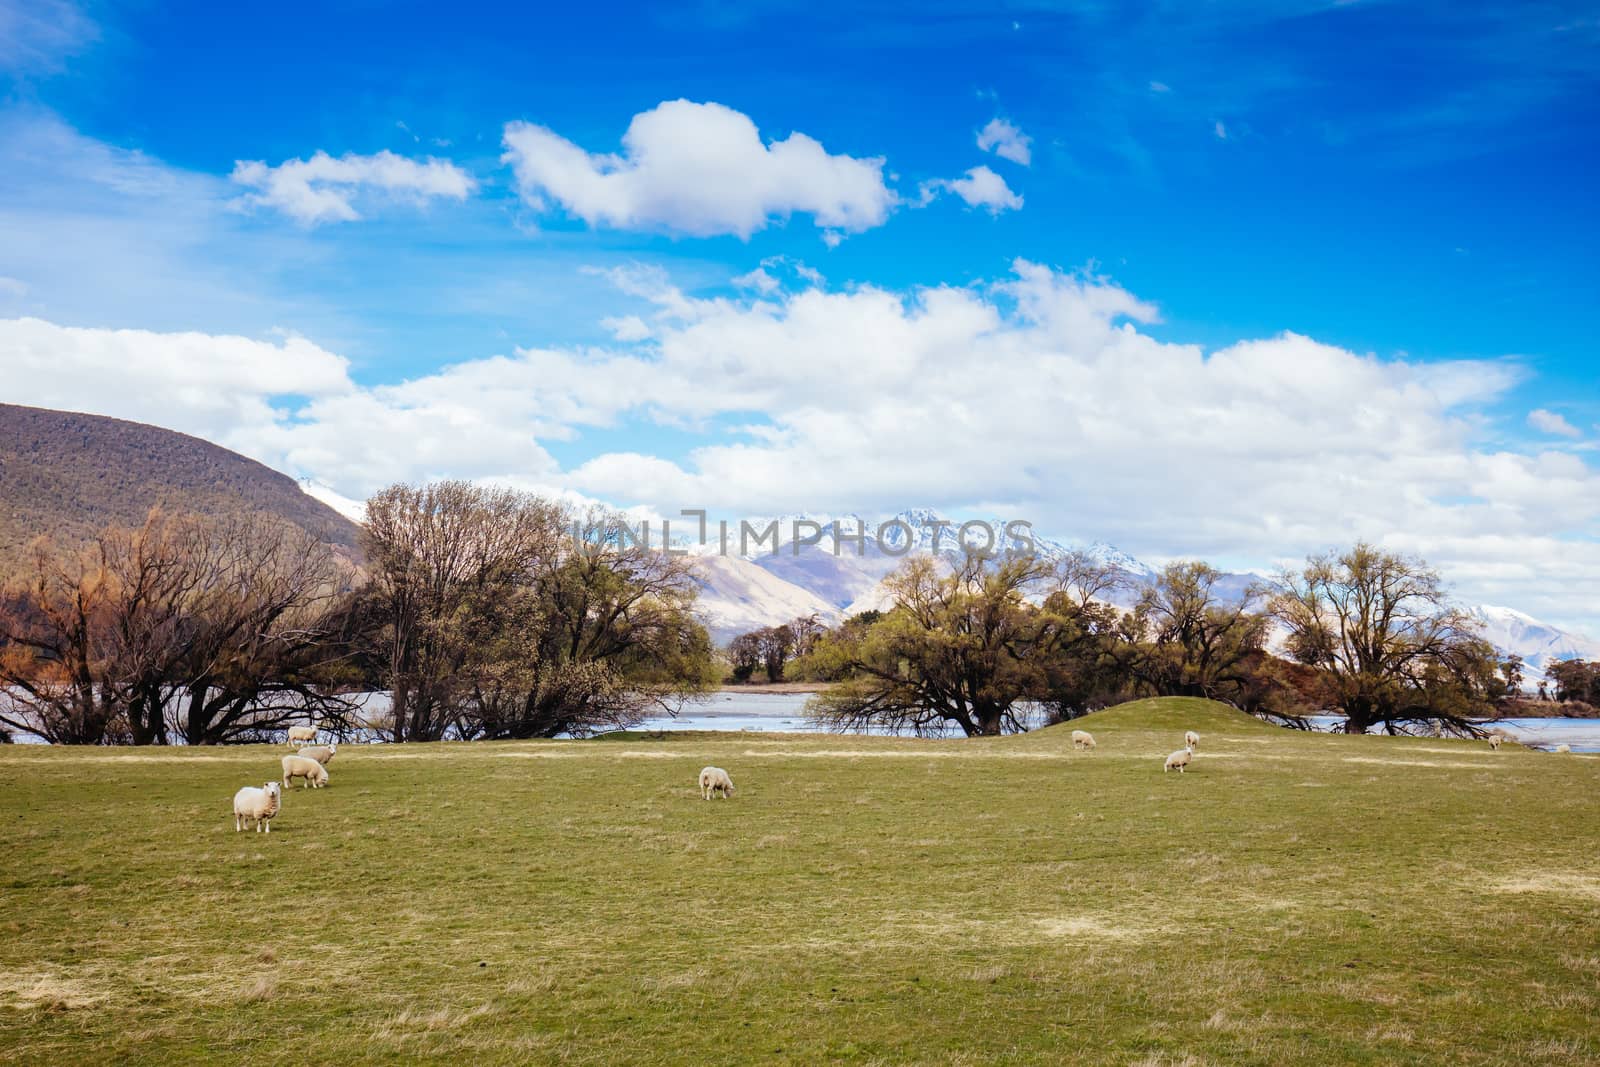 Landscape around Glenorchy and Paradise in New Zealand by FiledIMAGE